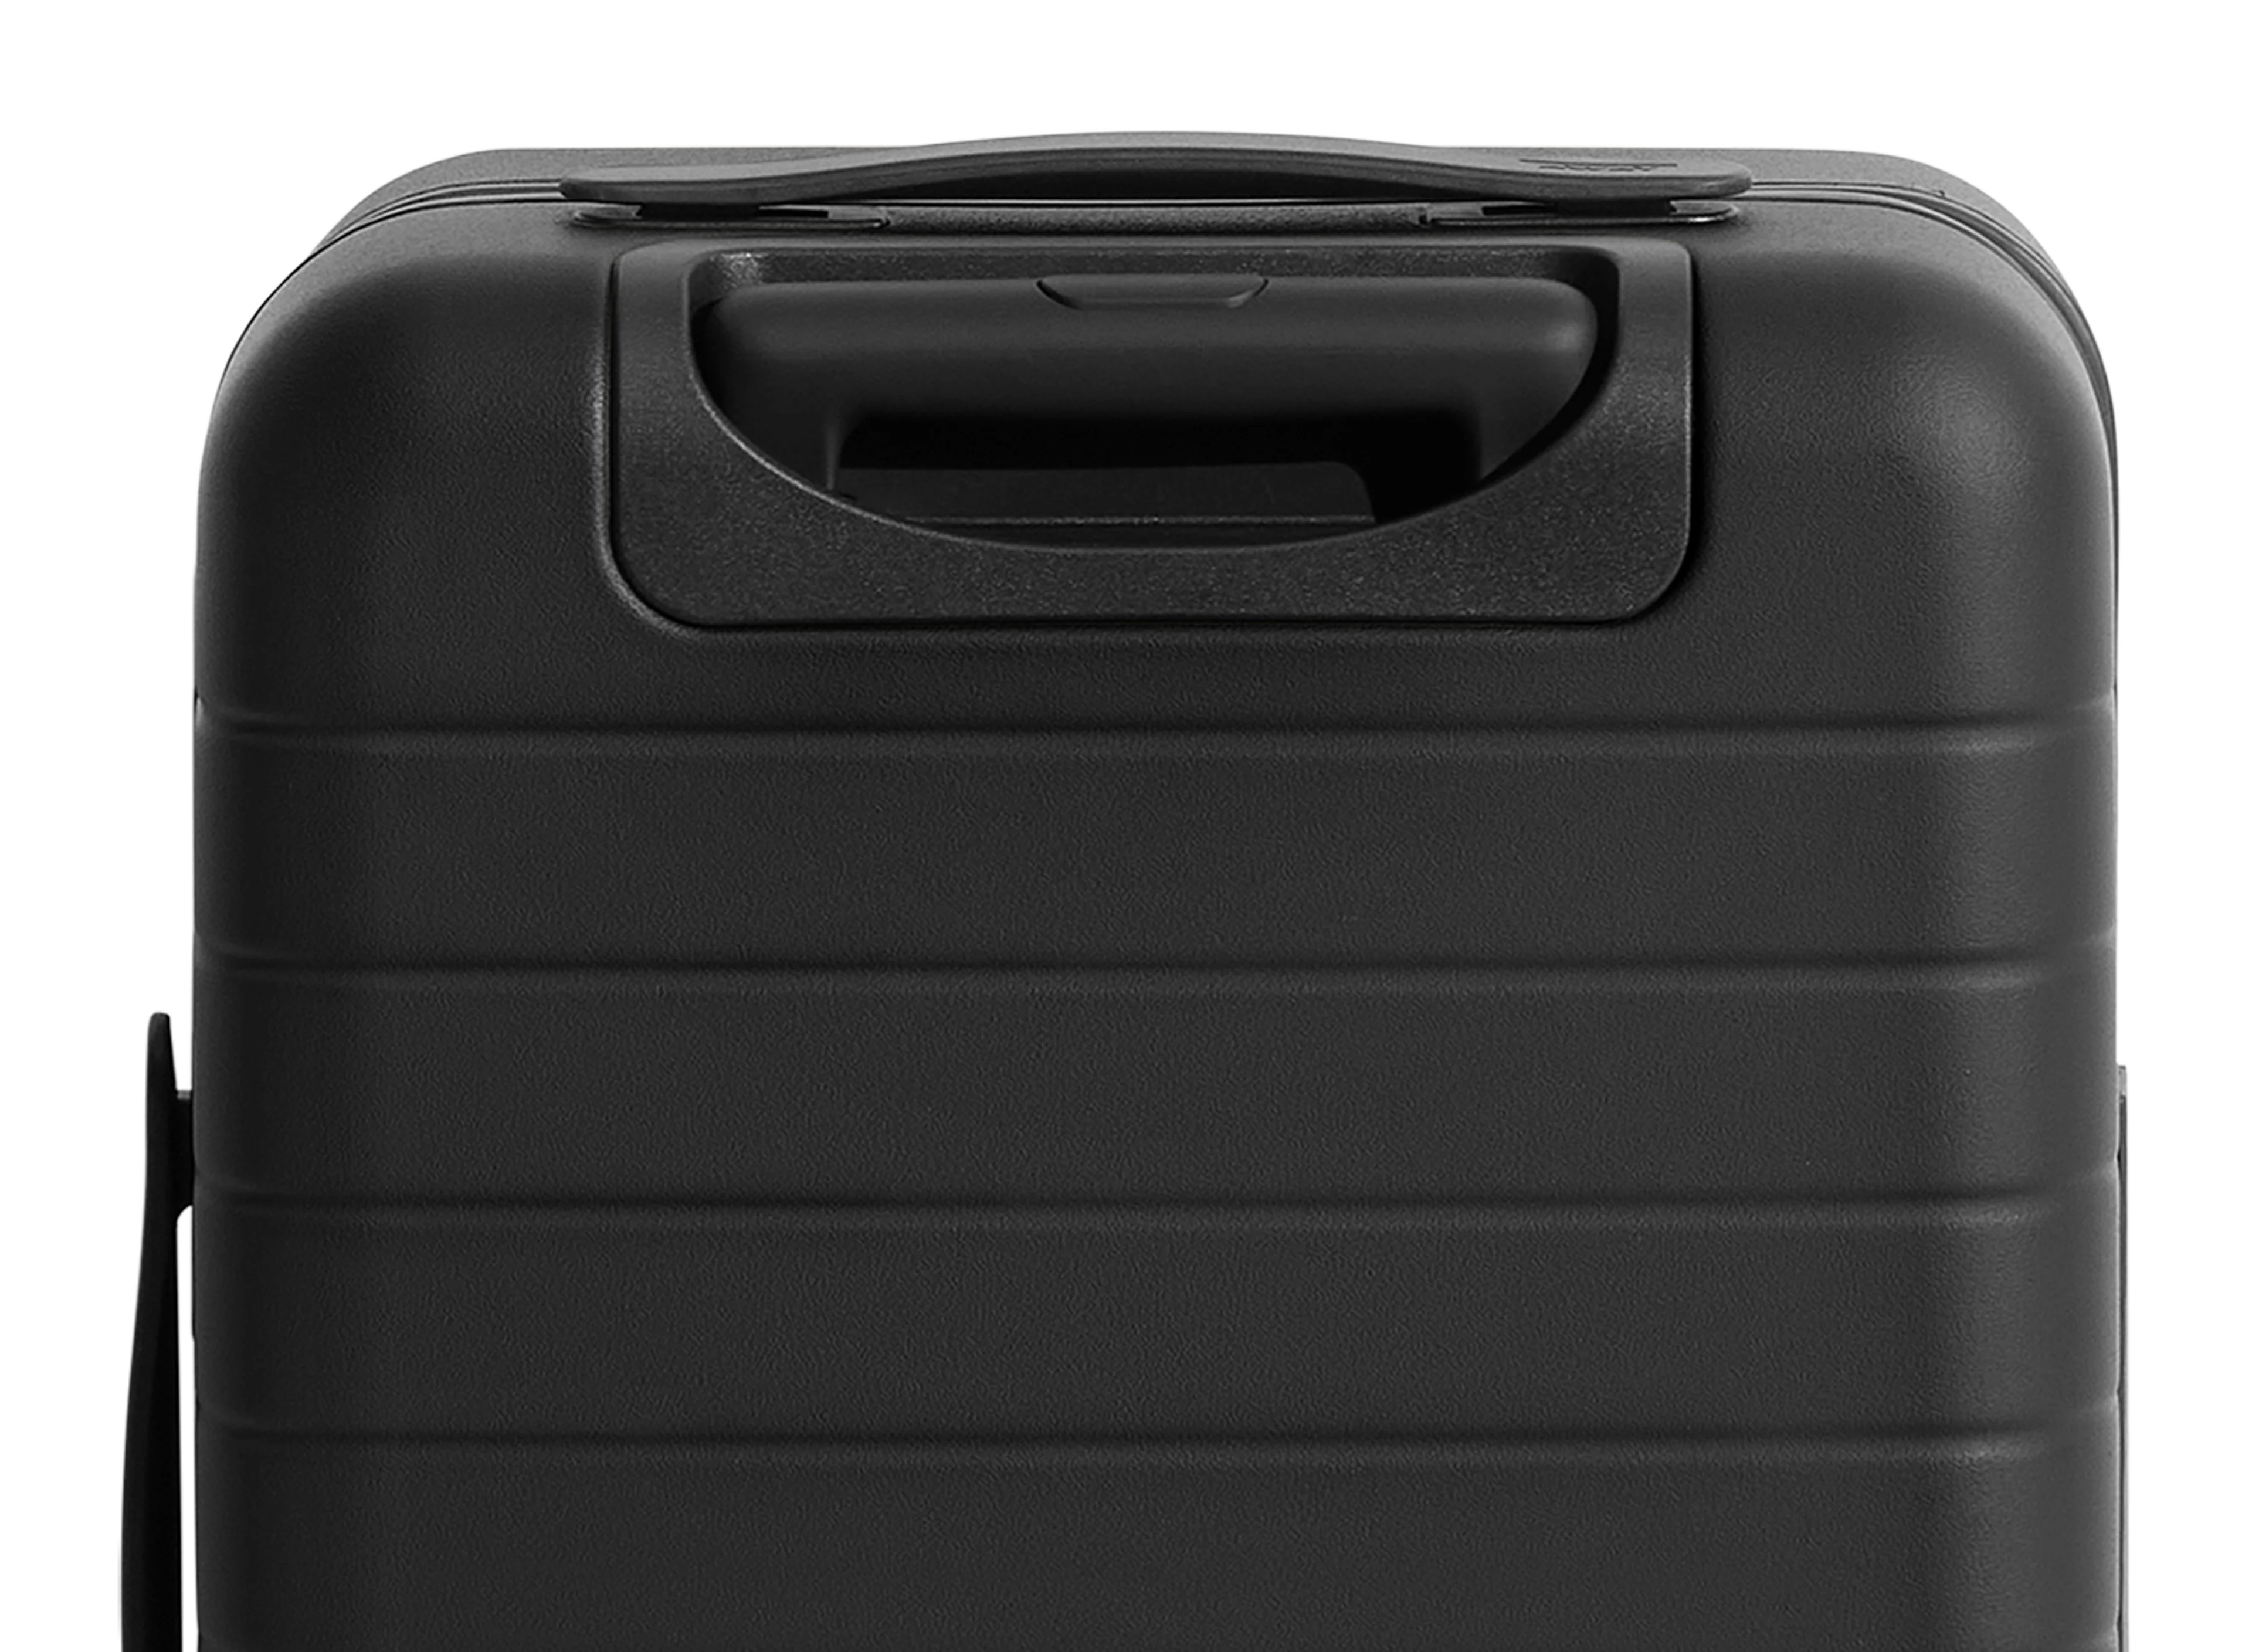 The Carry-On Flex in Jet Black